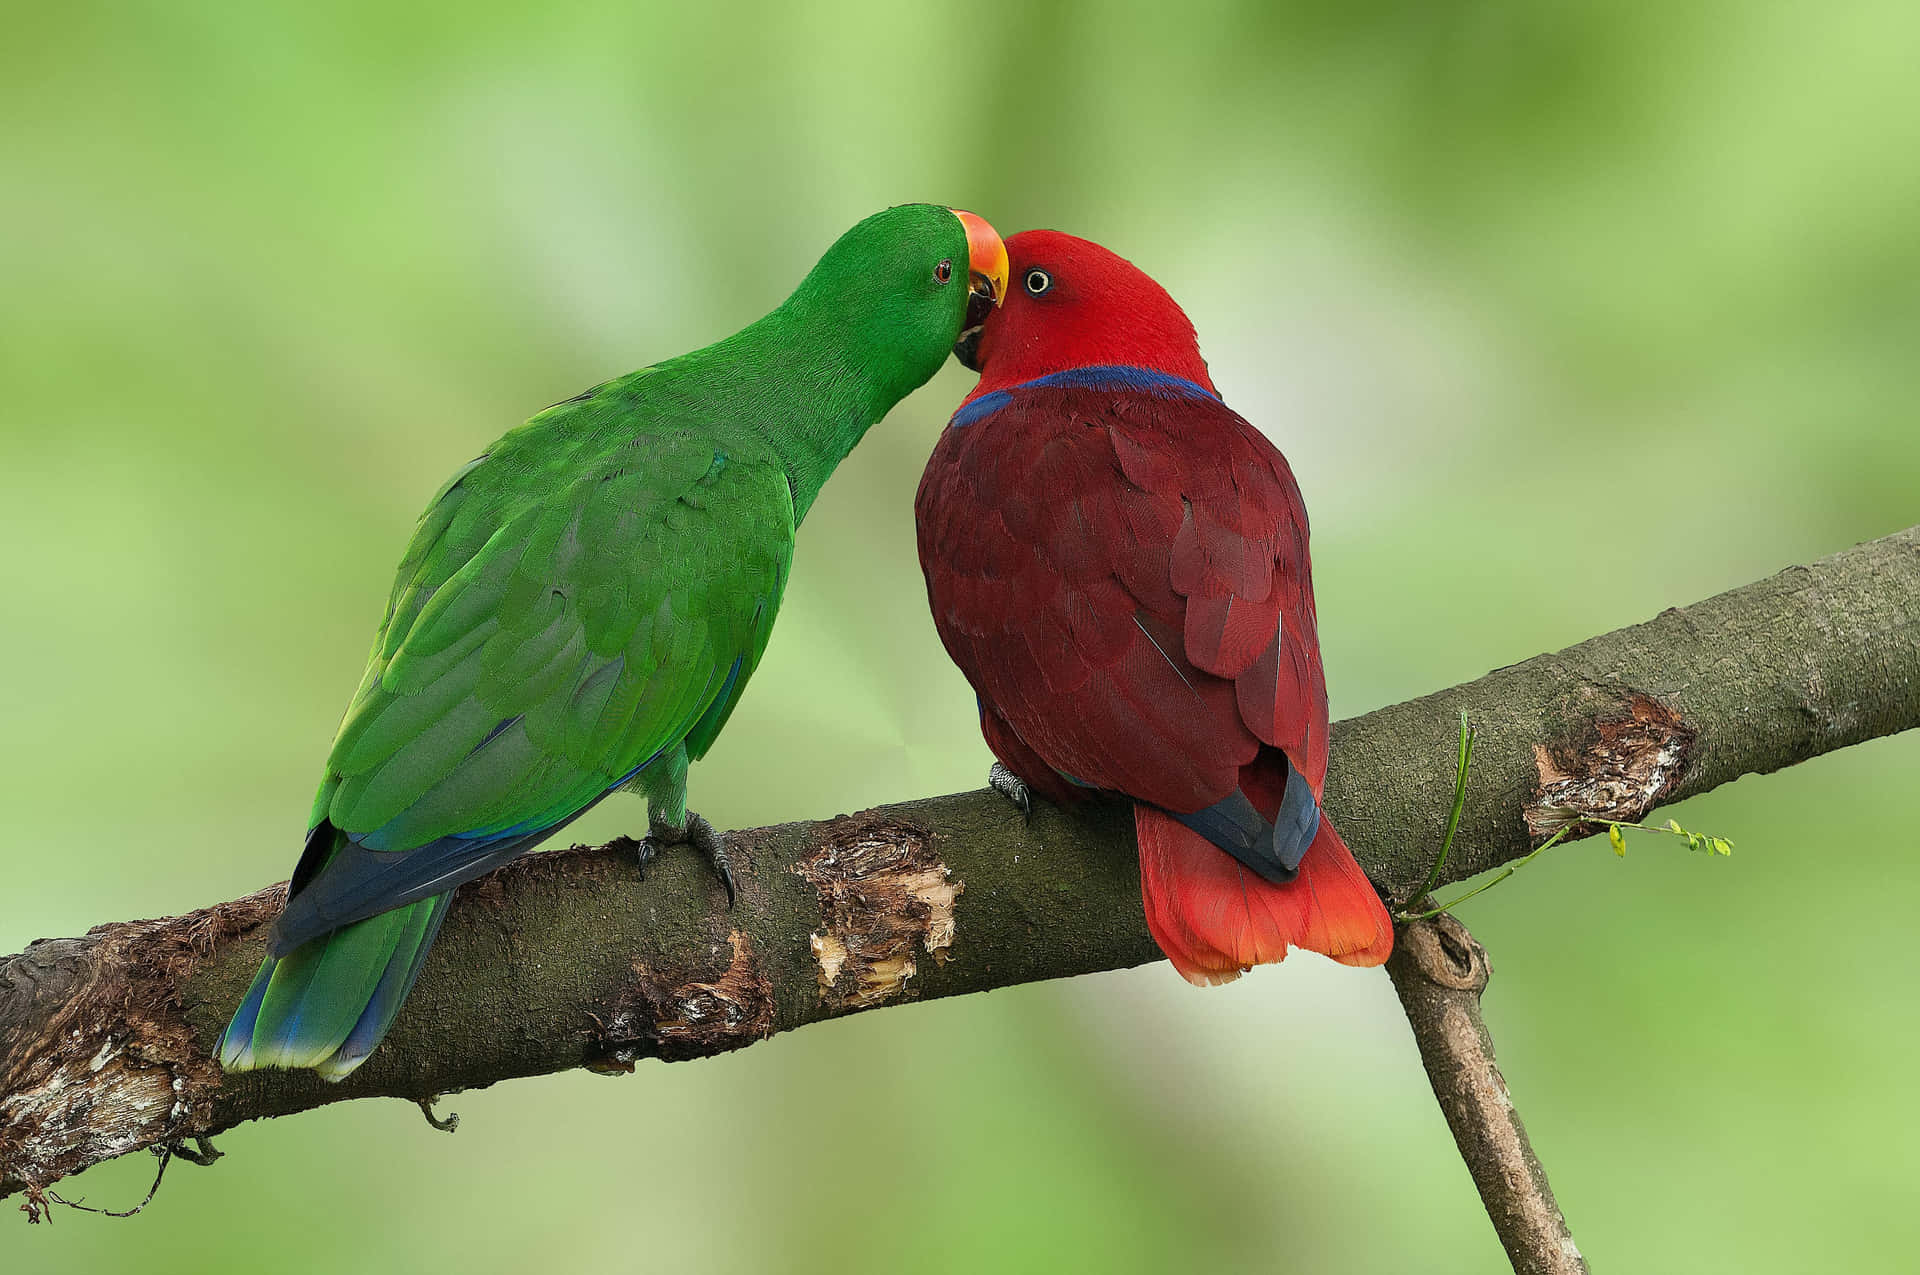 A colorful parrot perched on a branch